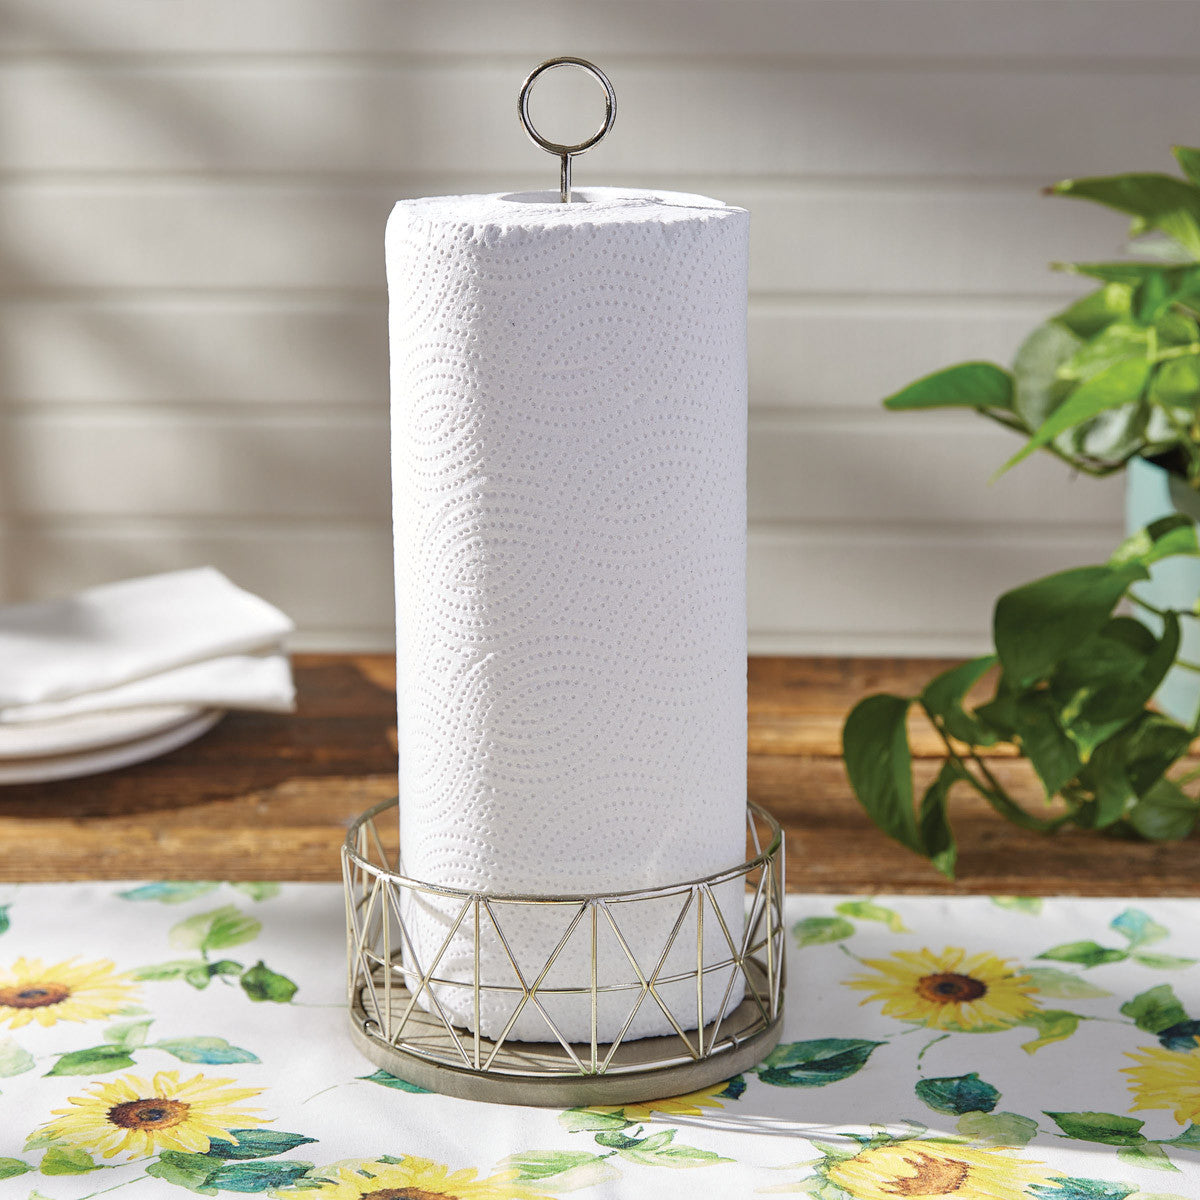 Vintage Paper Towel Holder - Iron Accents